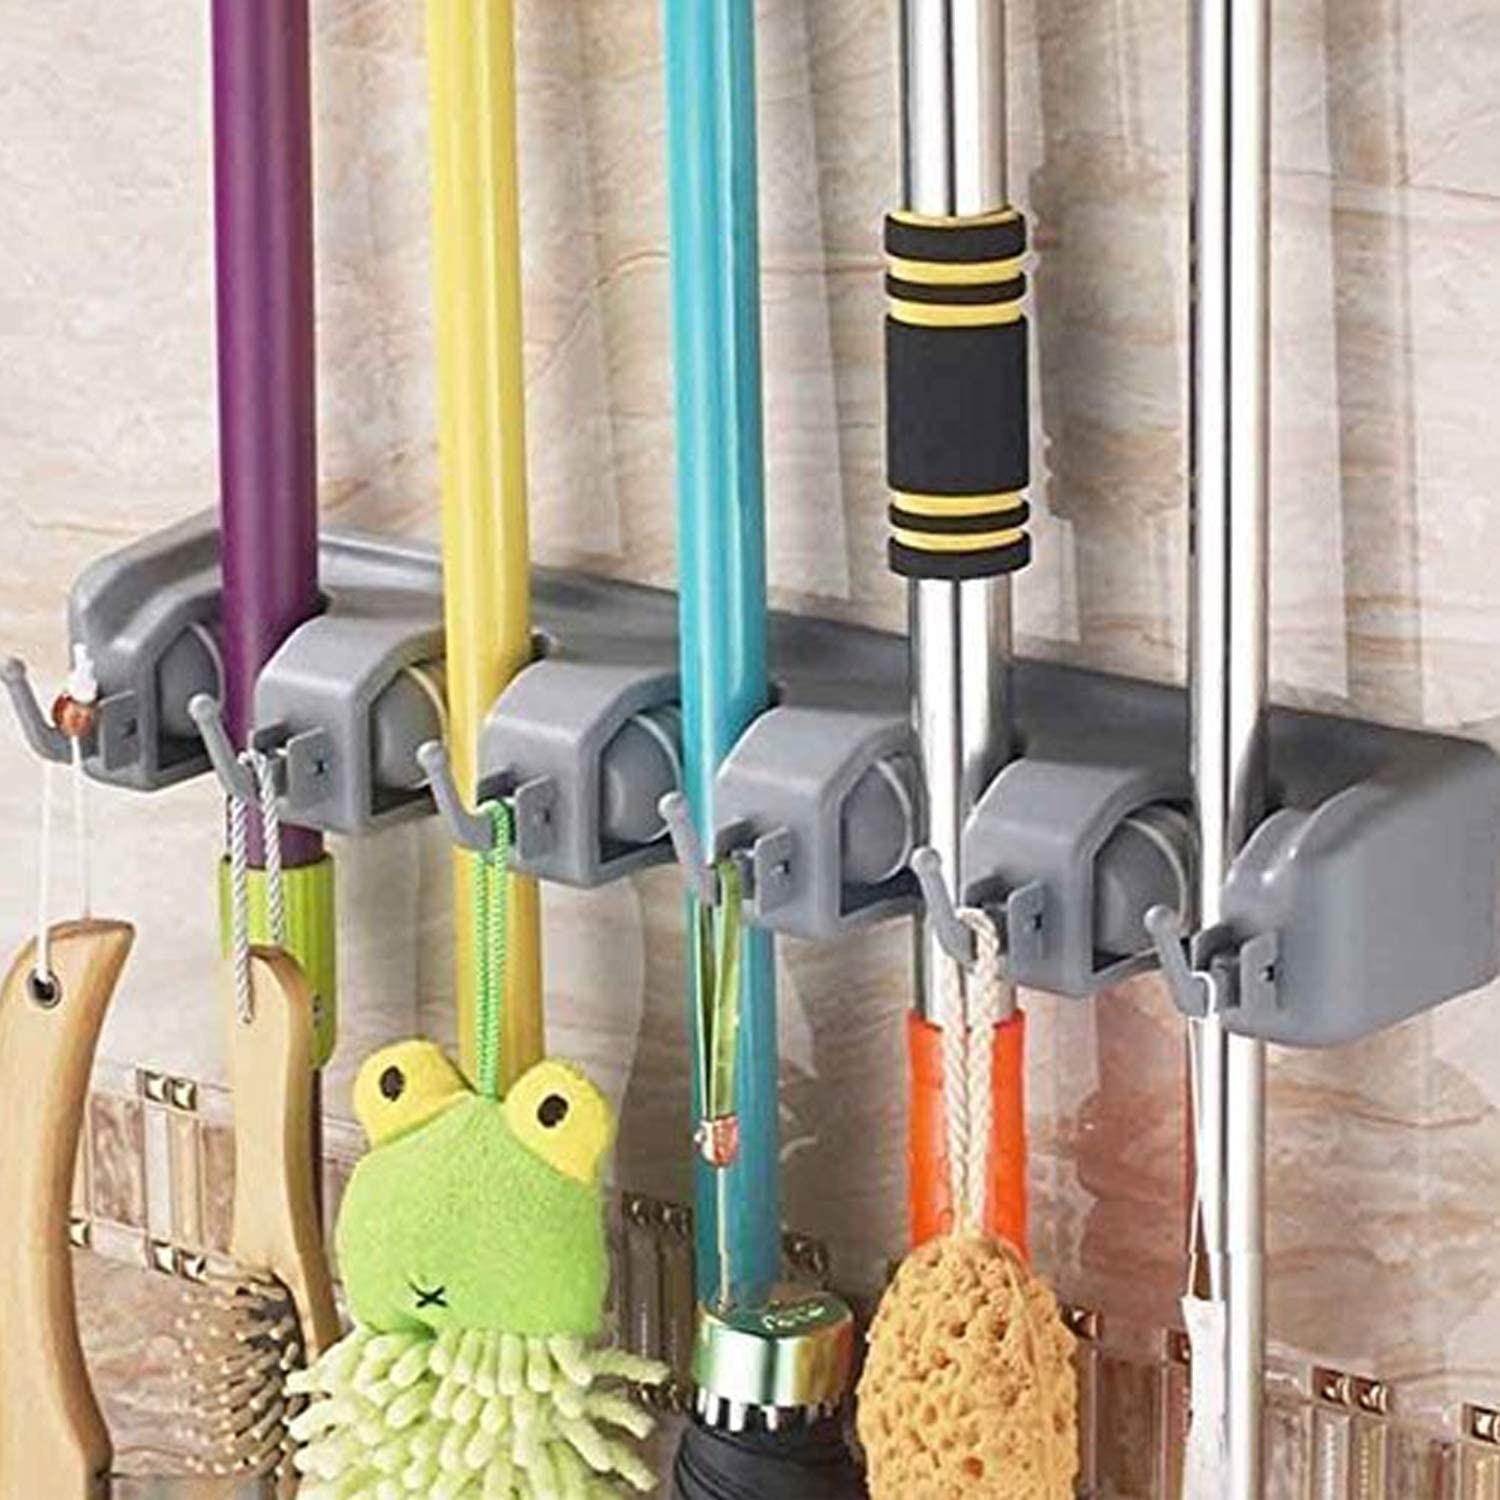 The broom holder hung up on a wall with mops and brooms in all five slots